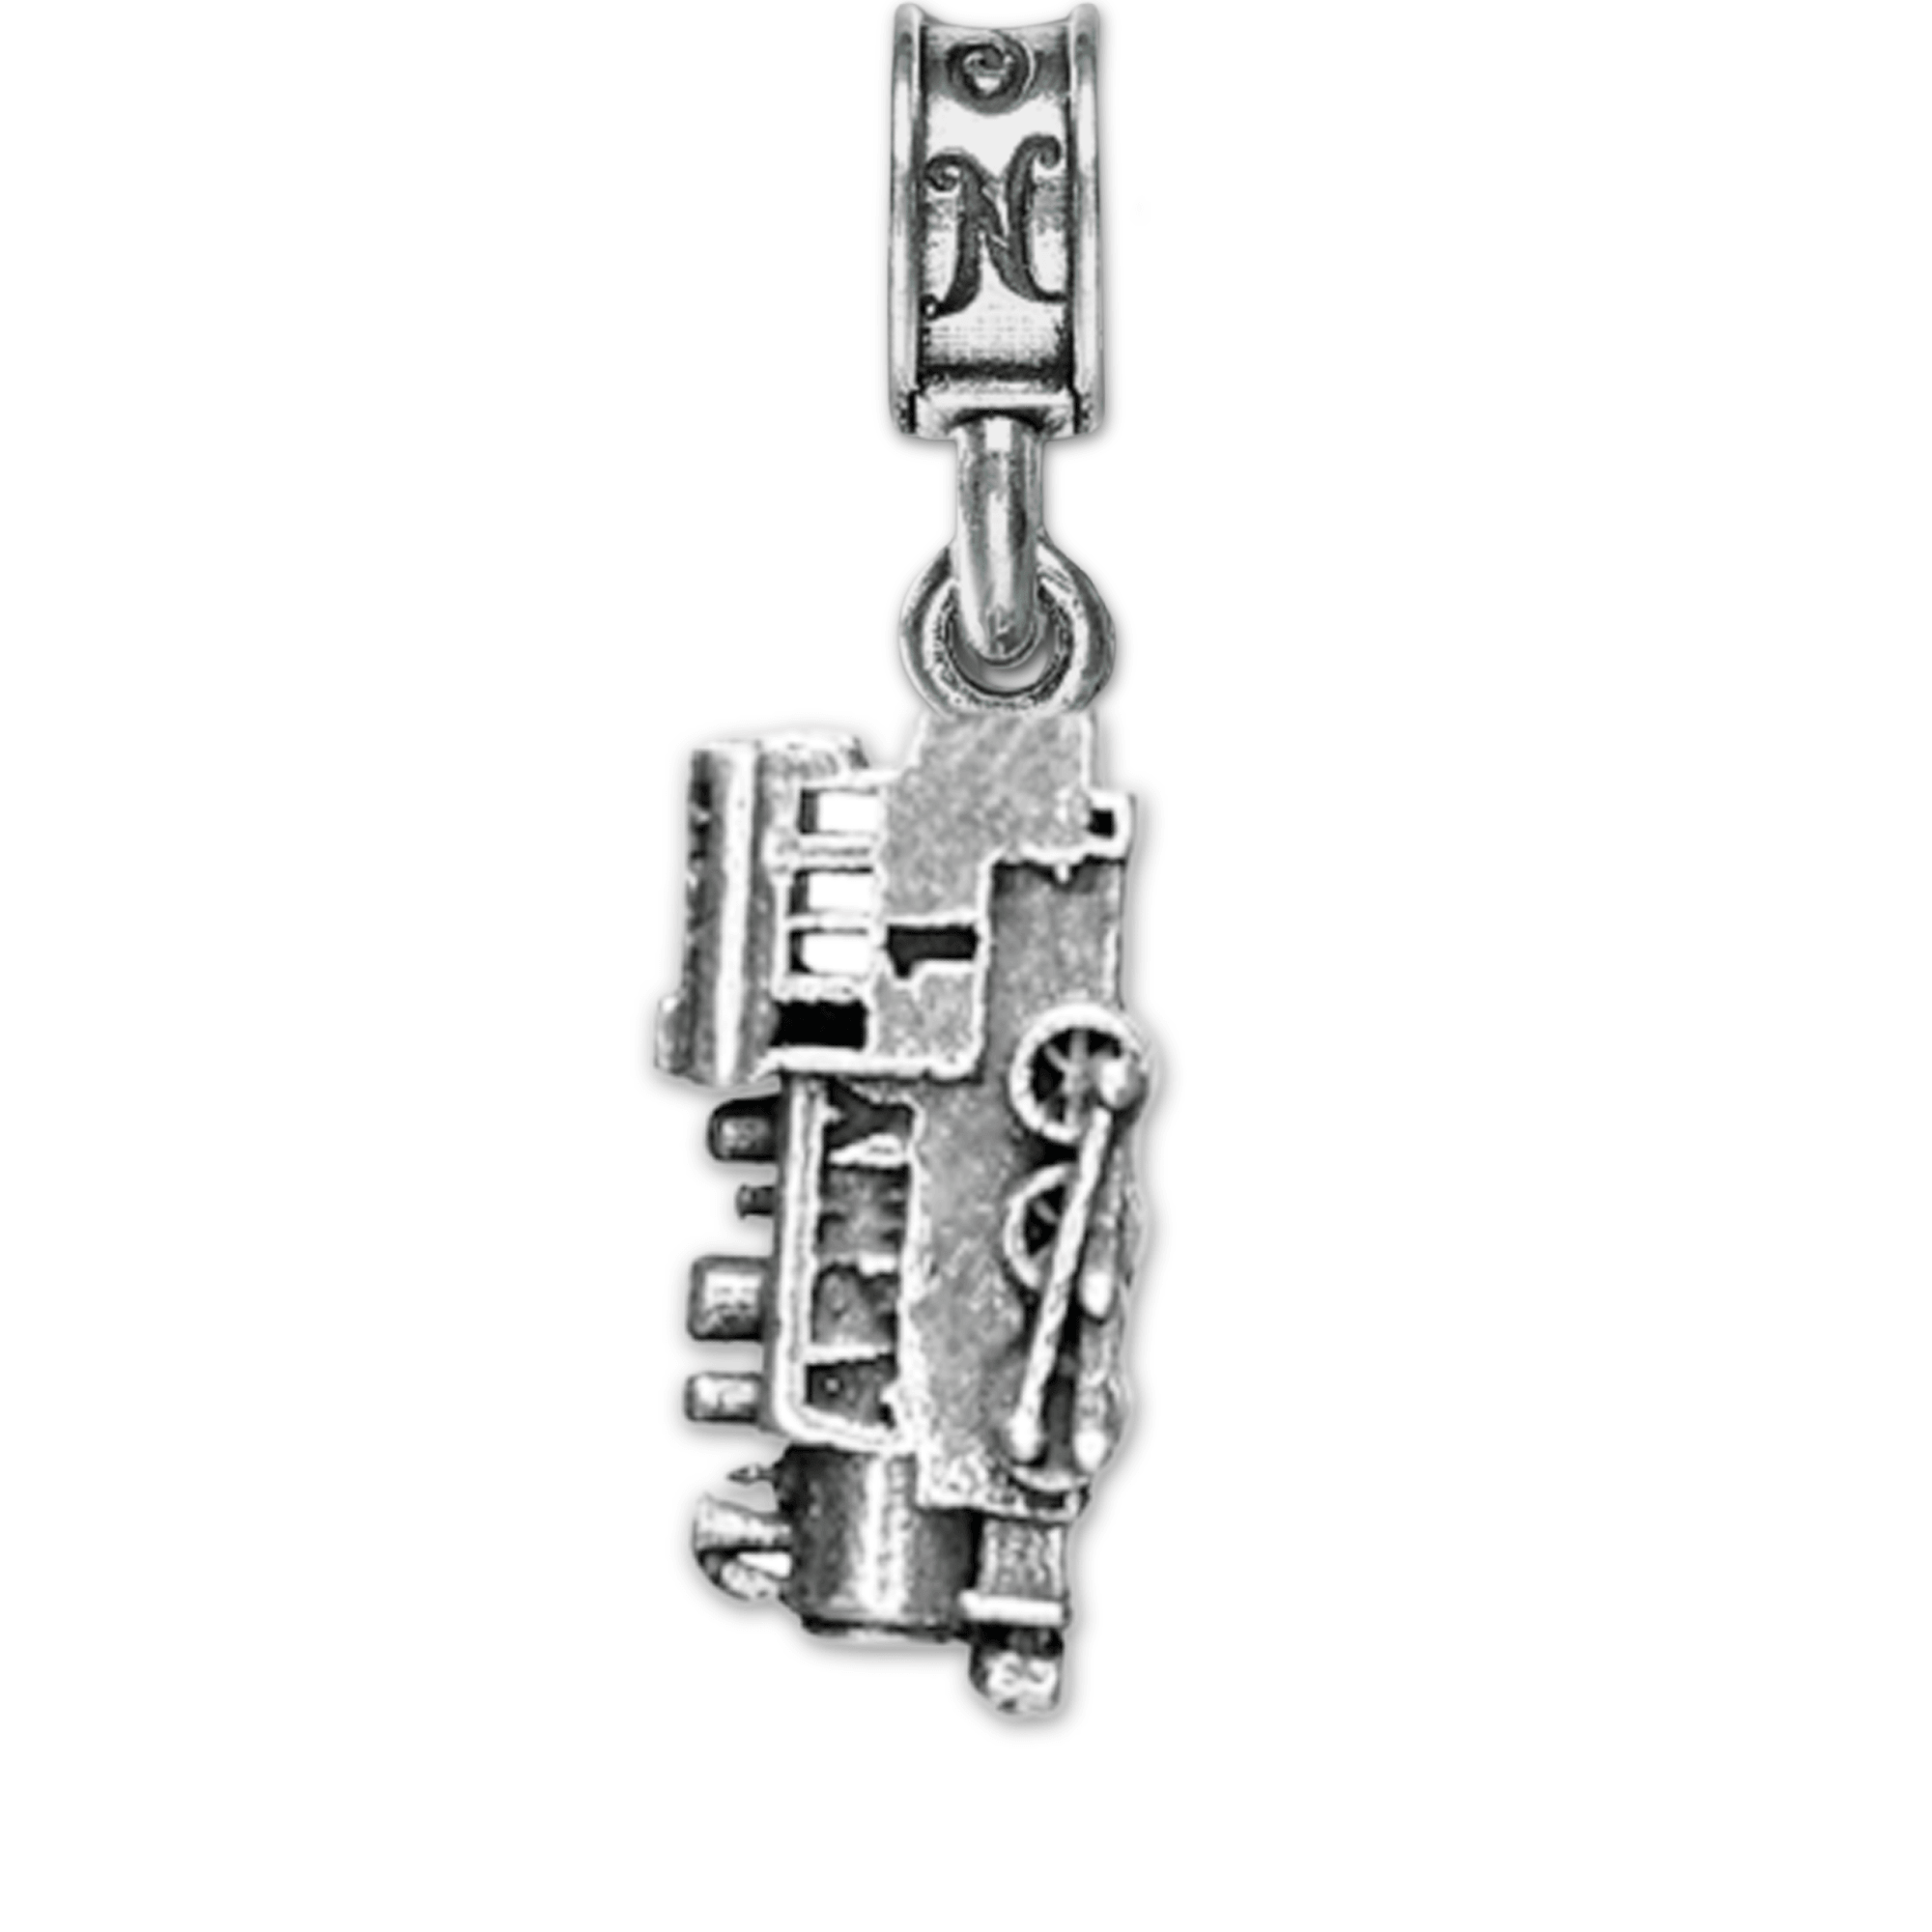 Military Jewelry, Military Charms, United States Army, Military Gifts, Fort Eustis, Virginia Transportation